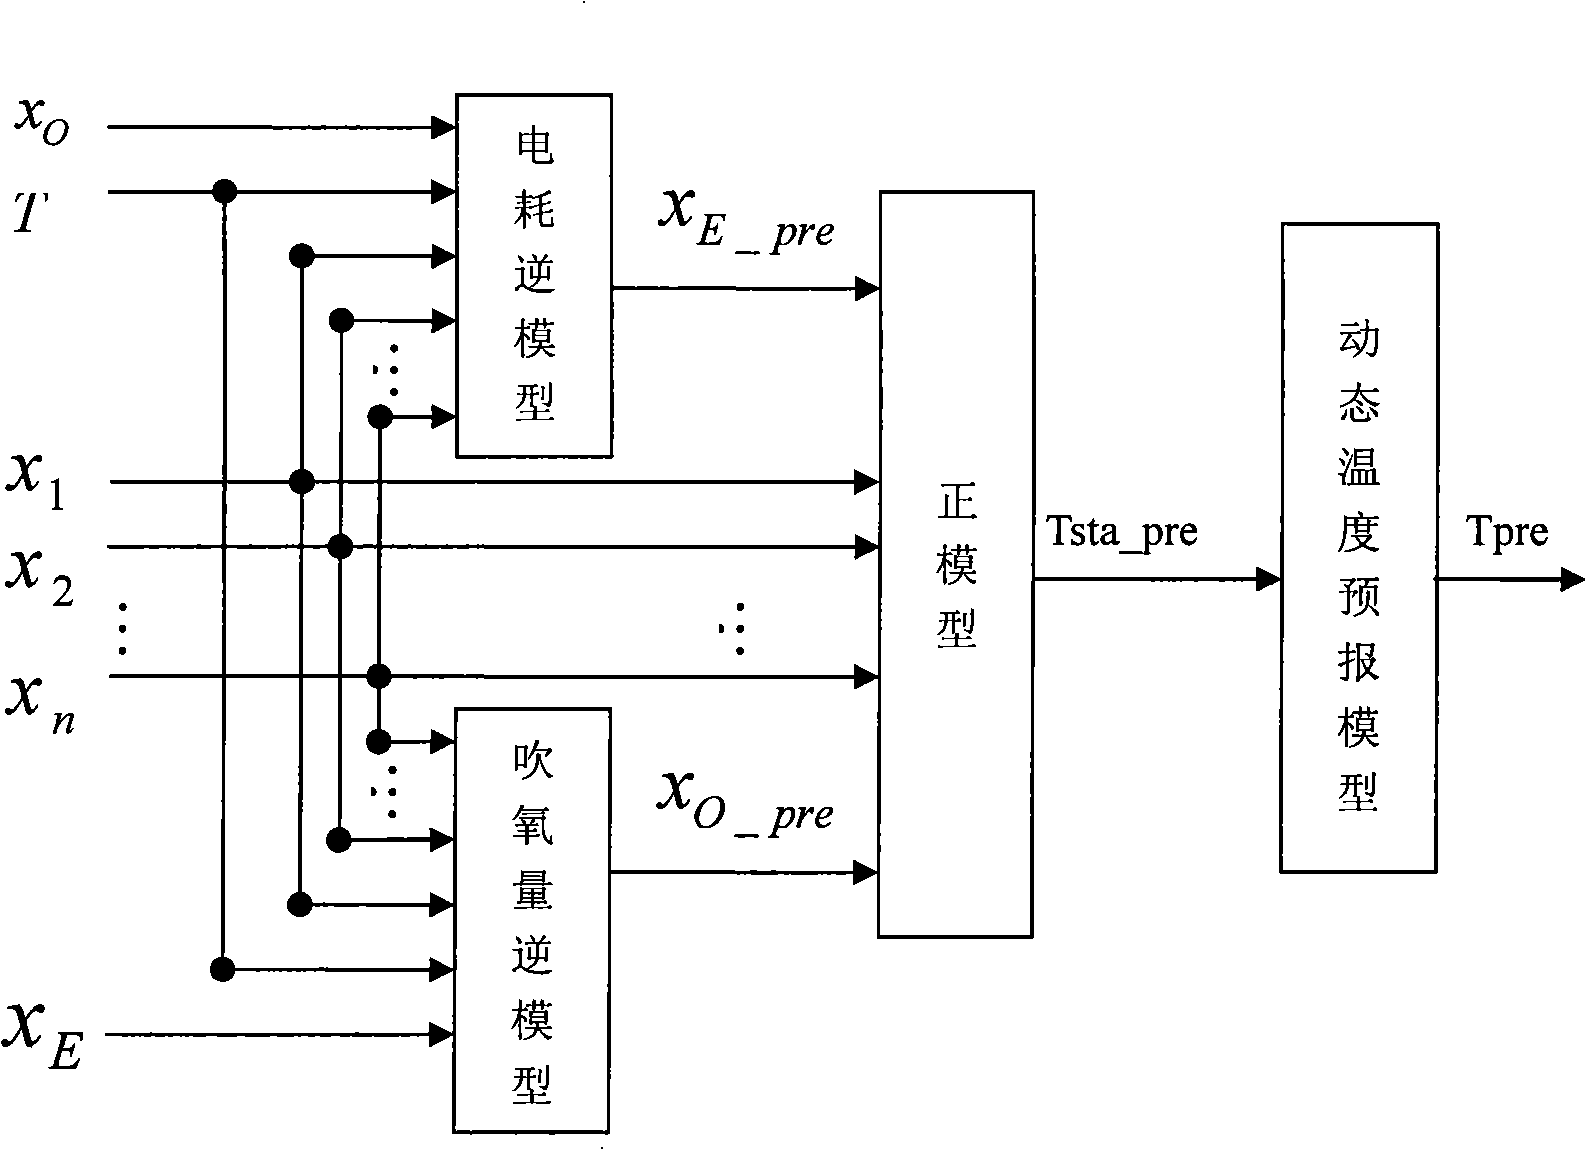 Electric arc furnace terminal temperature prediction system based on SVM